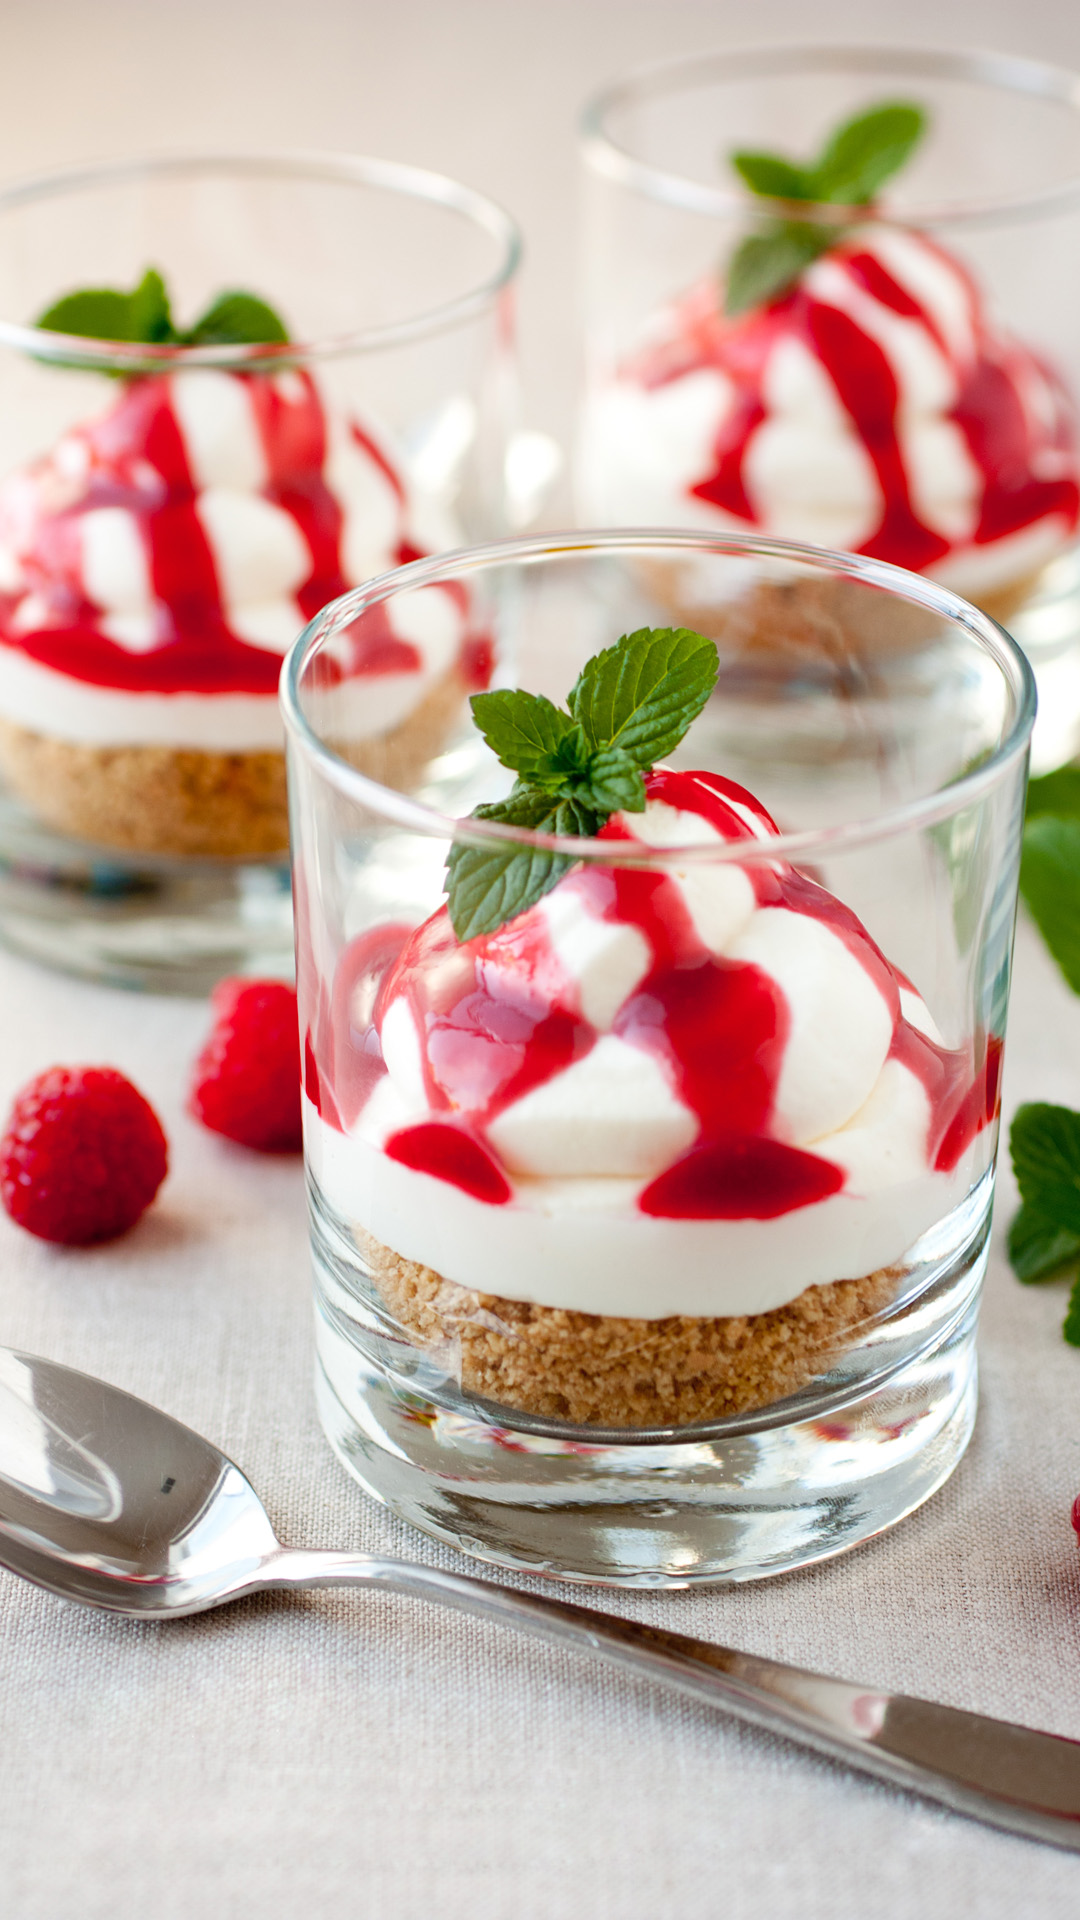 Cheesecake Mousse Htc One Wallpaper - Parfait , HD Wallpaper & Backgrounds